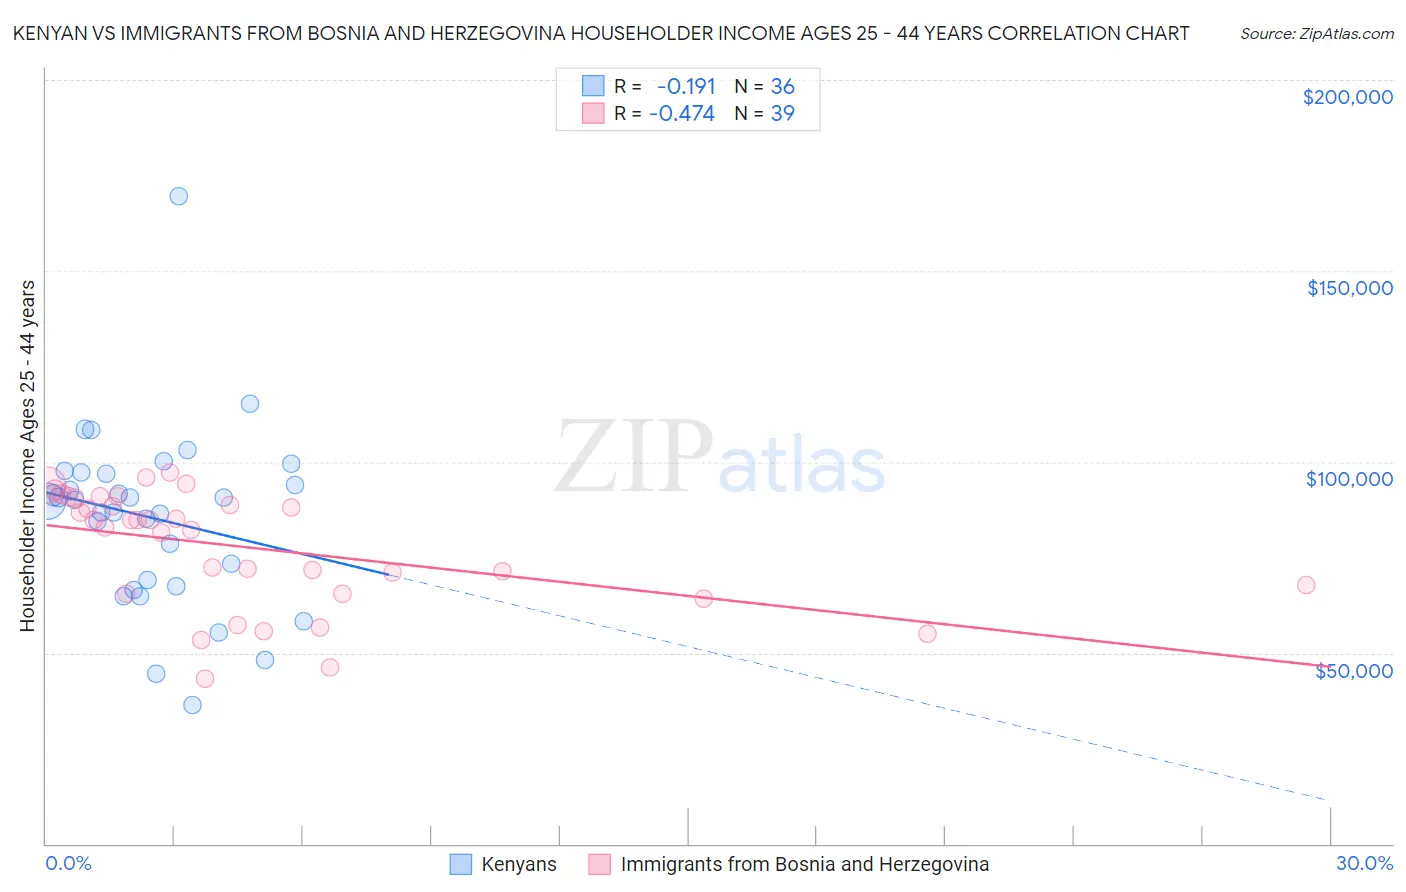 Kenyan vs Immigrants from Bosnia and Herzegovina Householder Income Ages 25 - 44 years